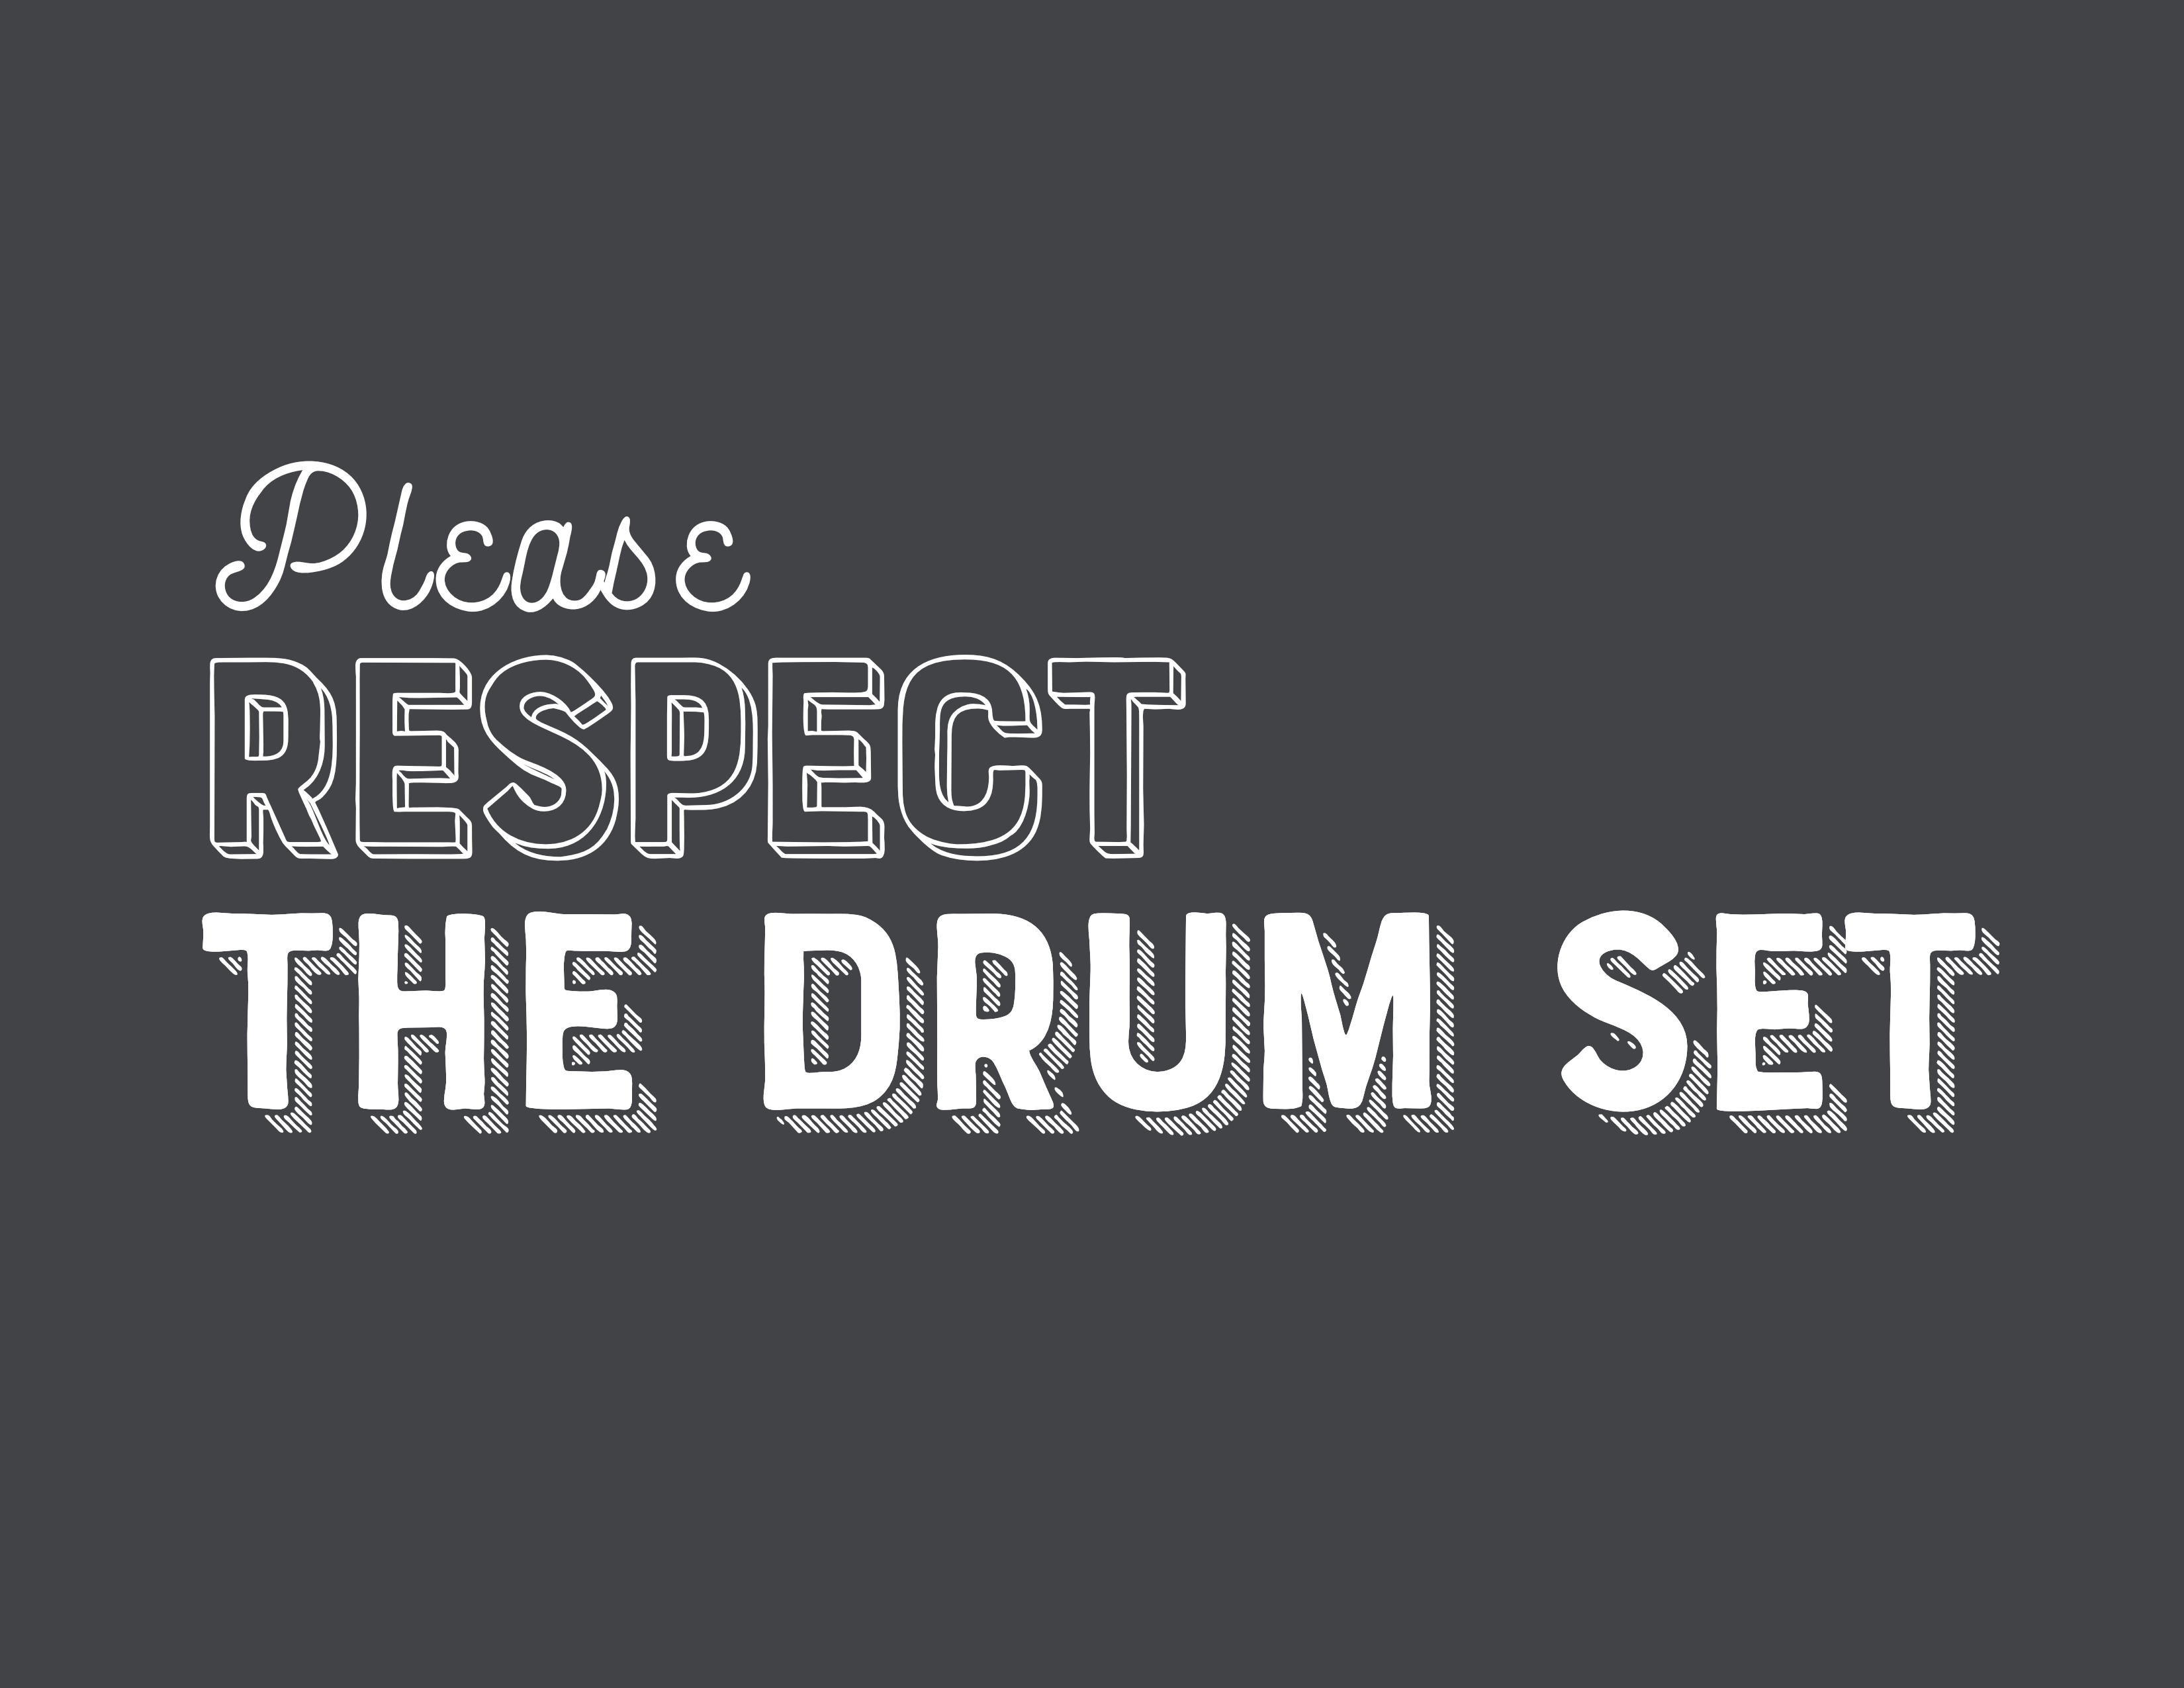 Respect the drumset